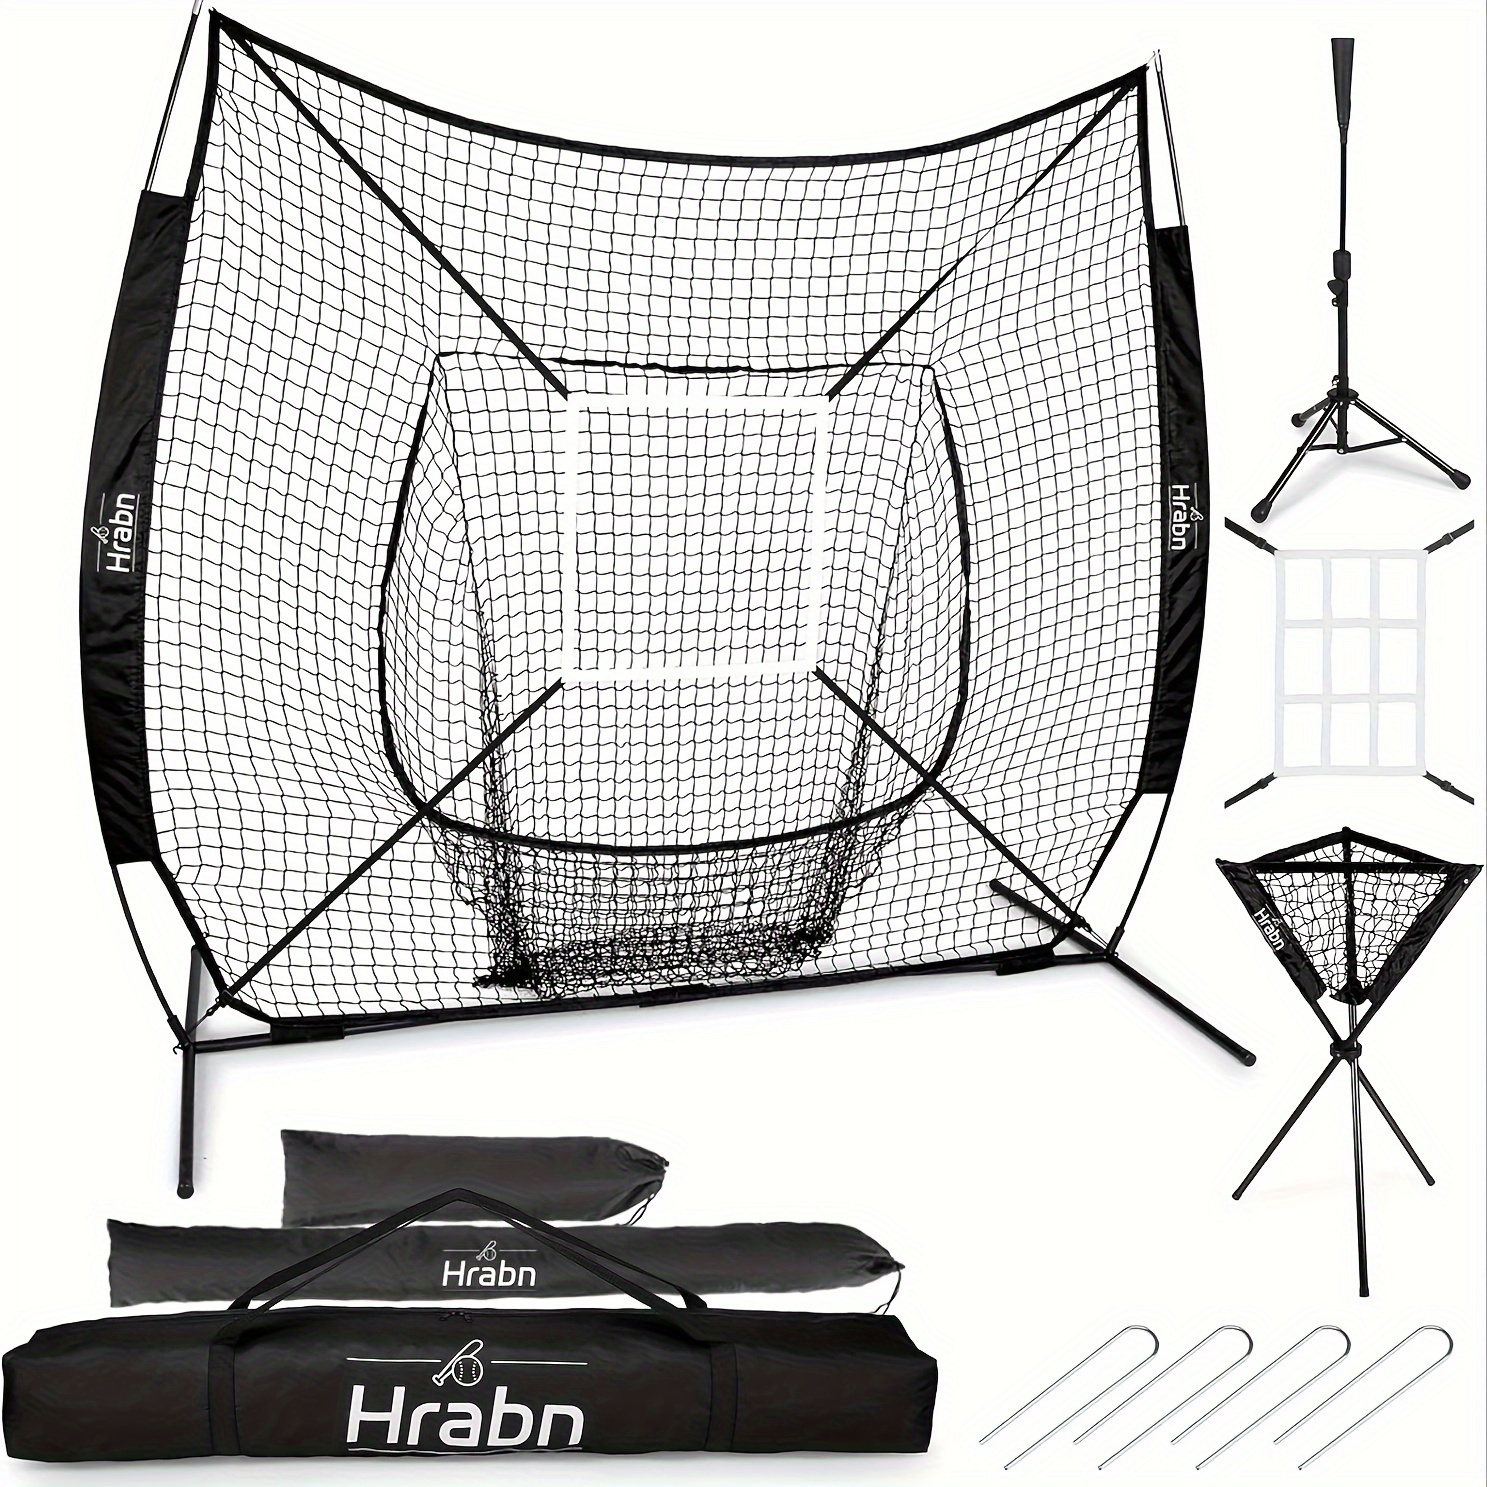 

7x7' Portable Softball & Baseball Net Set For Hitting And Pitching With Batting Tee Ball Caddy Target And Carry Bag Baseball Training Equipment For Youth Adult Sport Practice